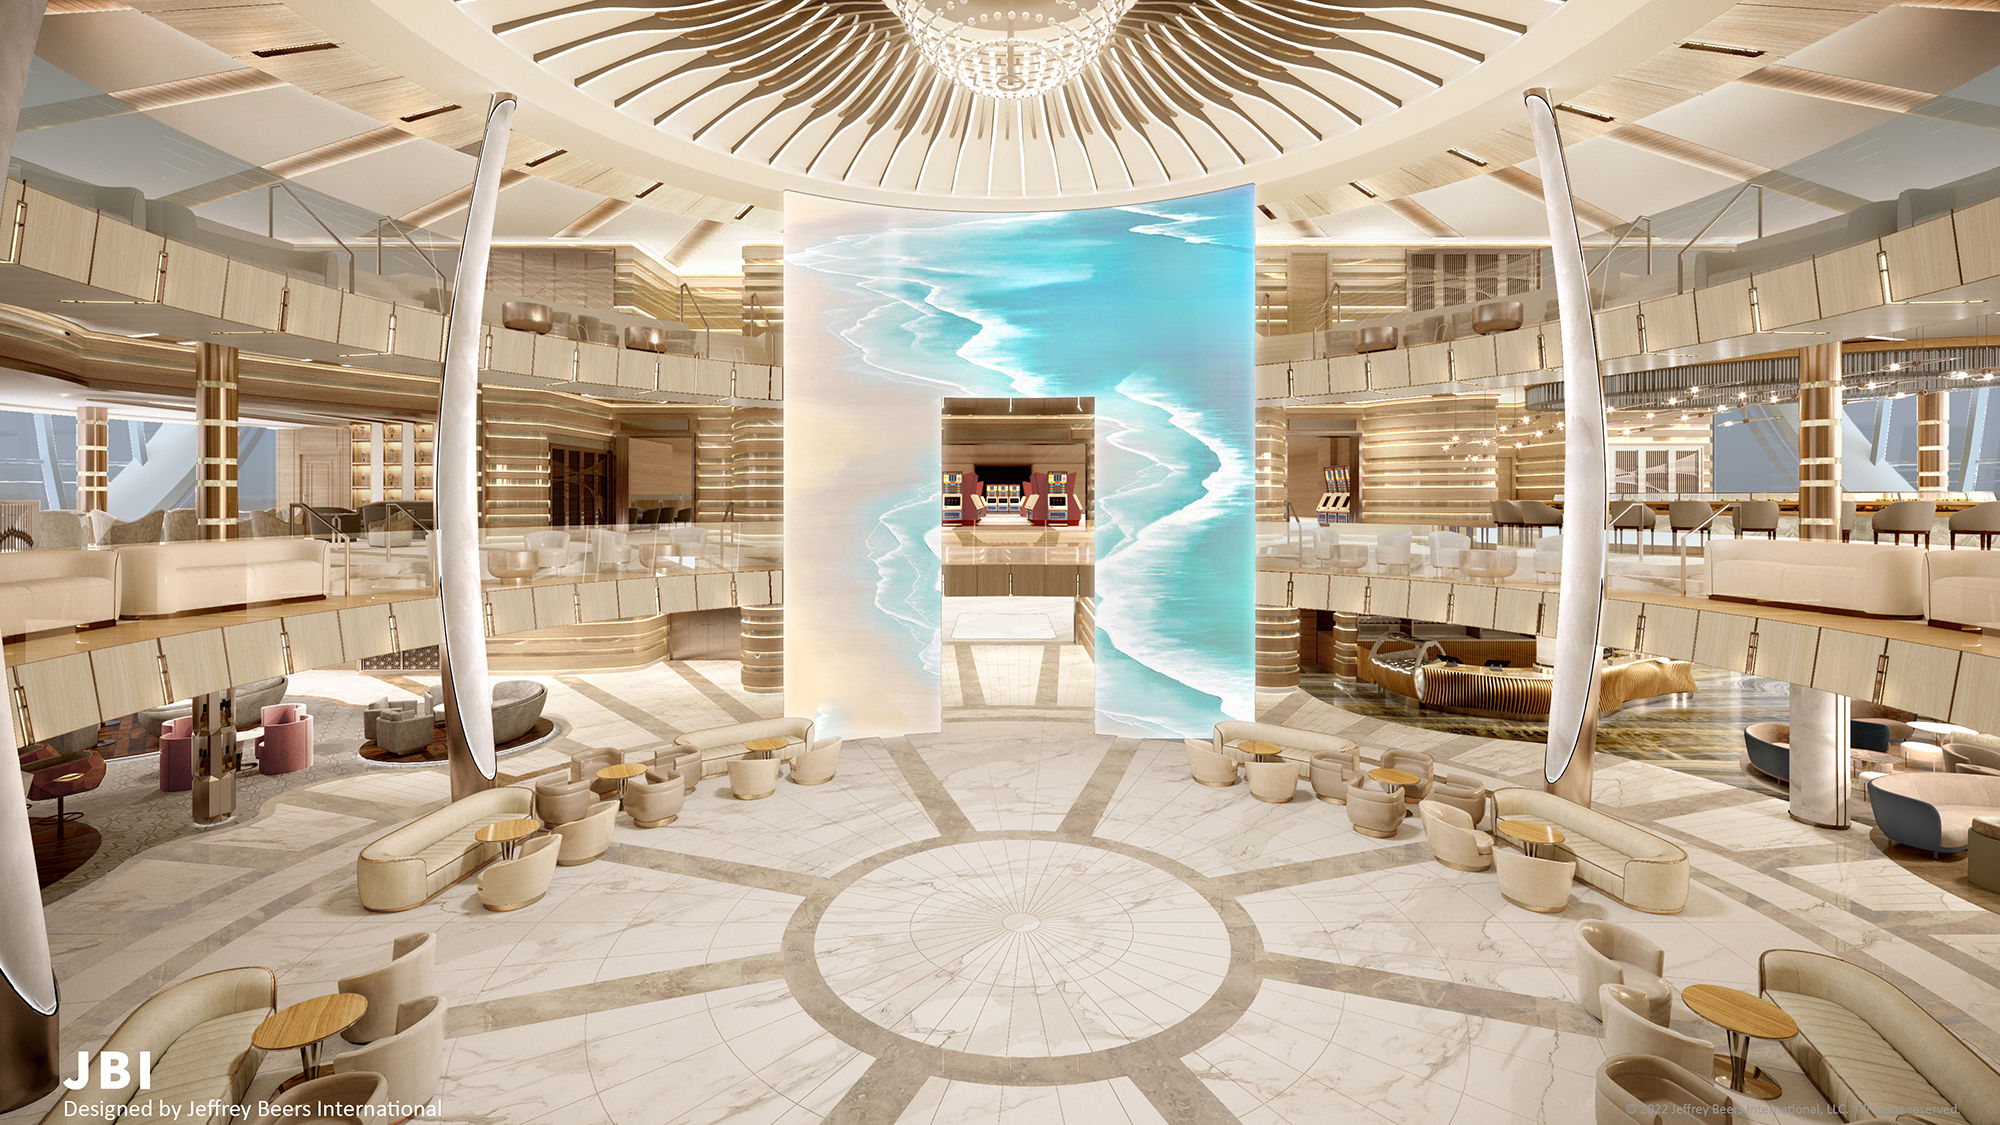 The Sun Princess' Piazza comprises three decks of the Sphere and will have a giant LED screen feature.